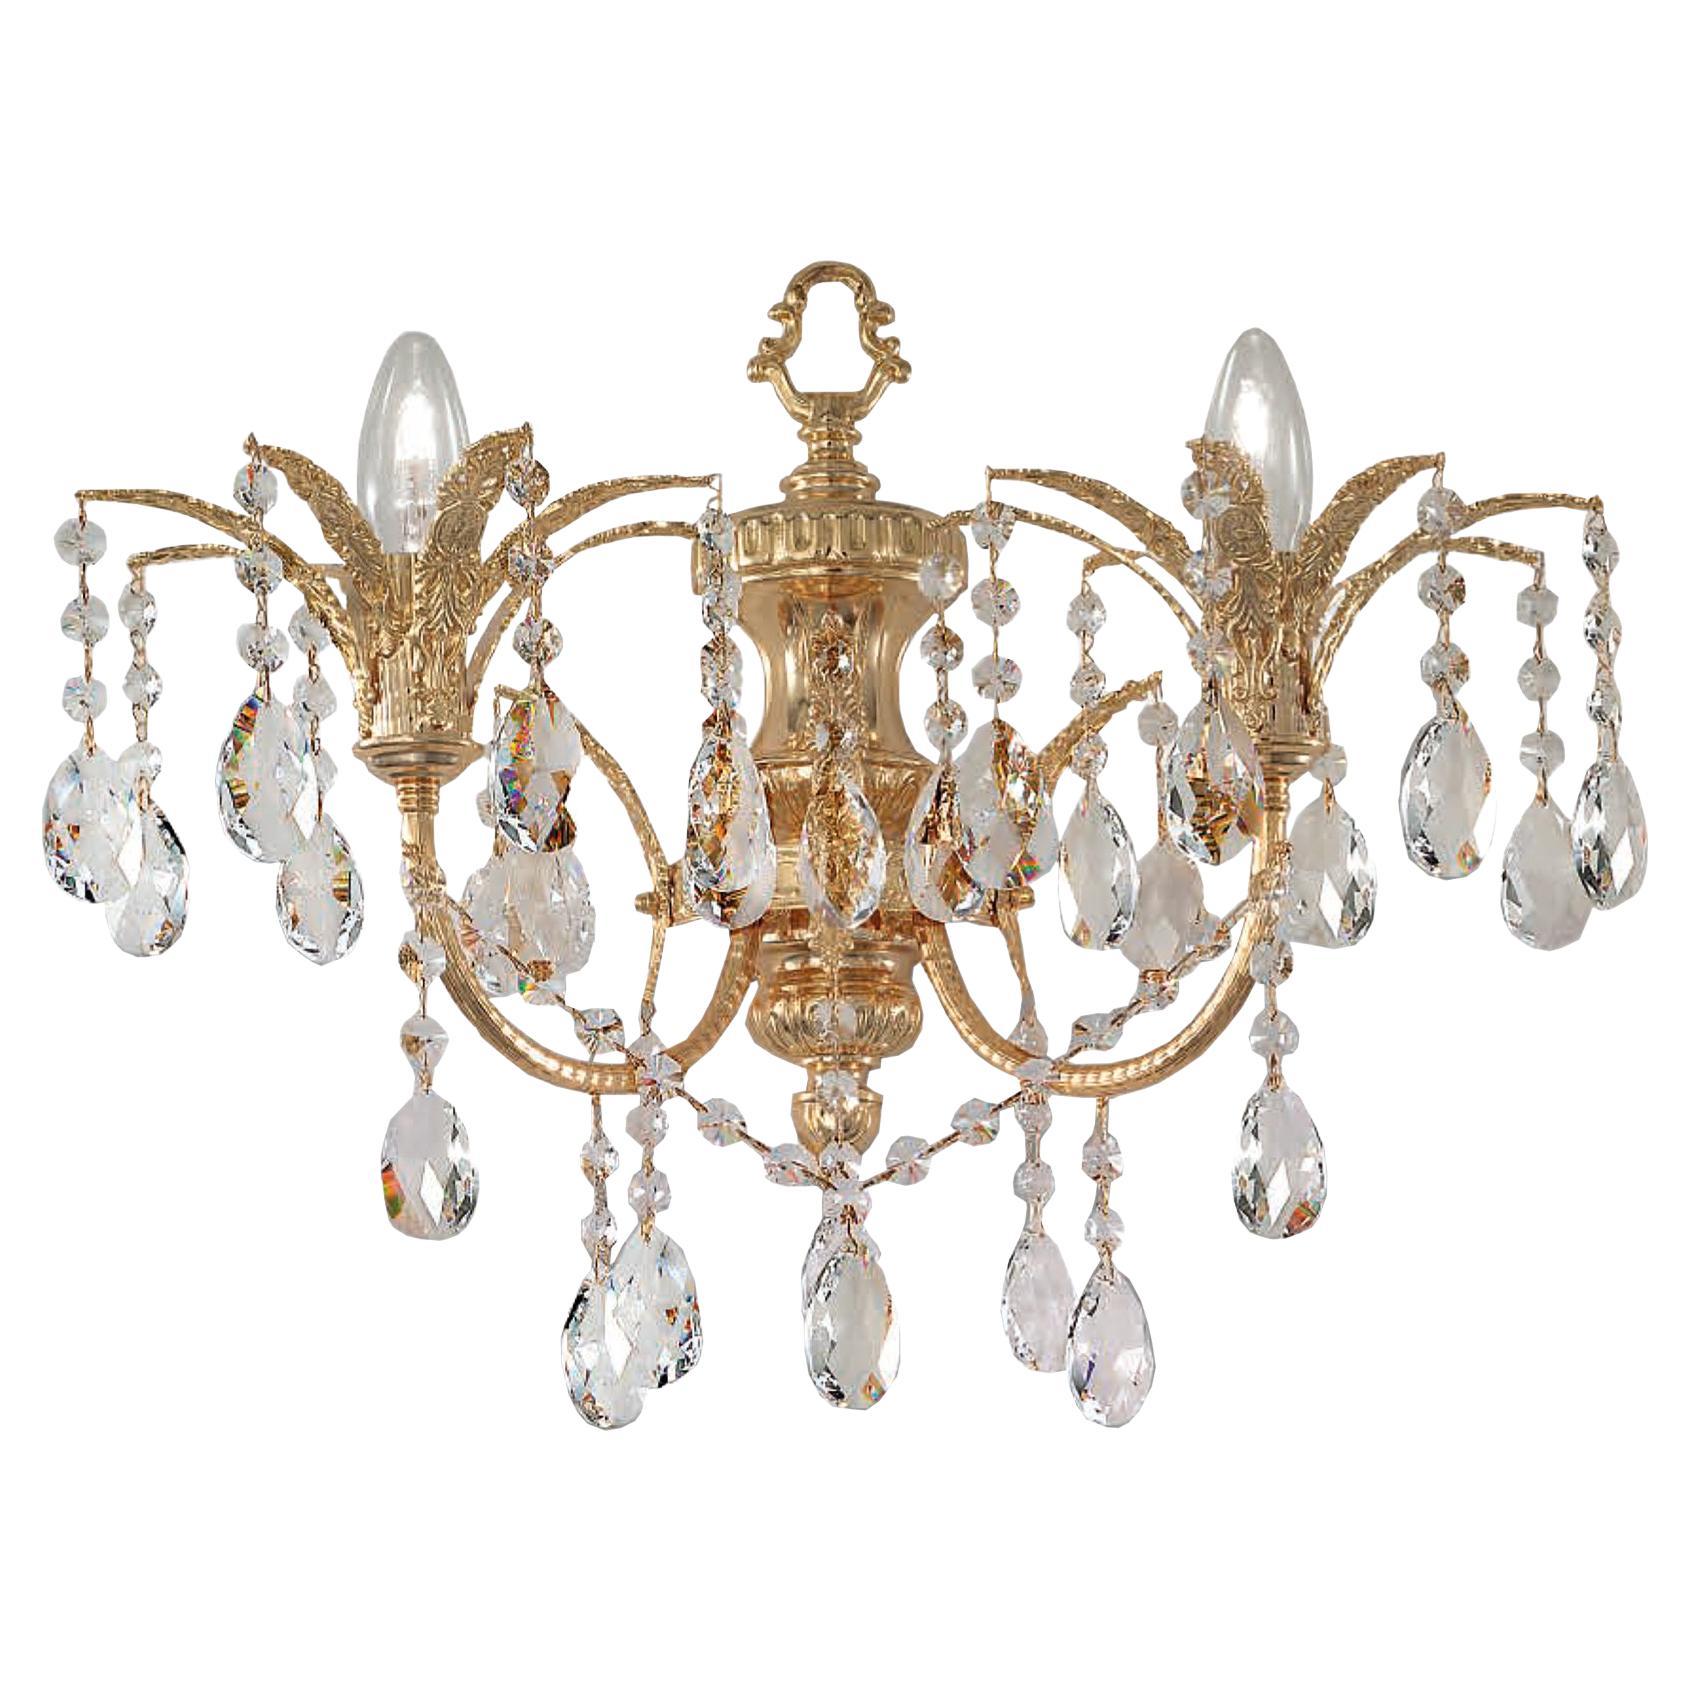 2 Lights Wall Sconce in 24kt Plated Finish with Crystal Pendants by Modenese